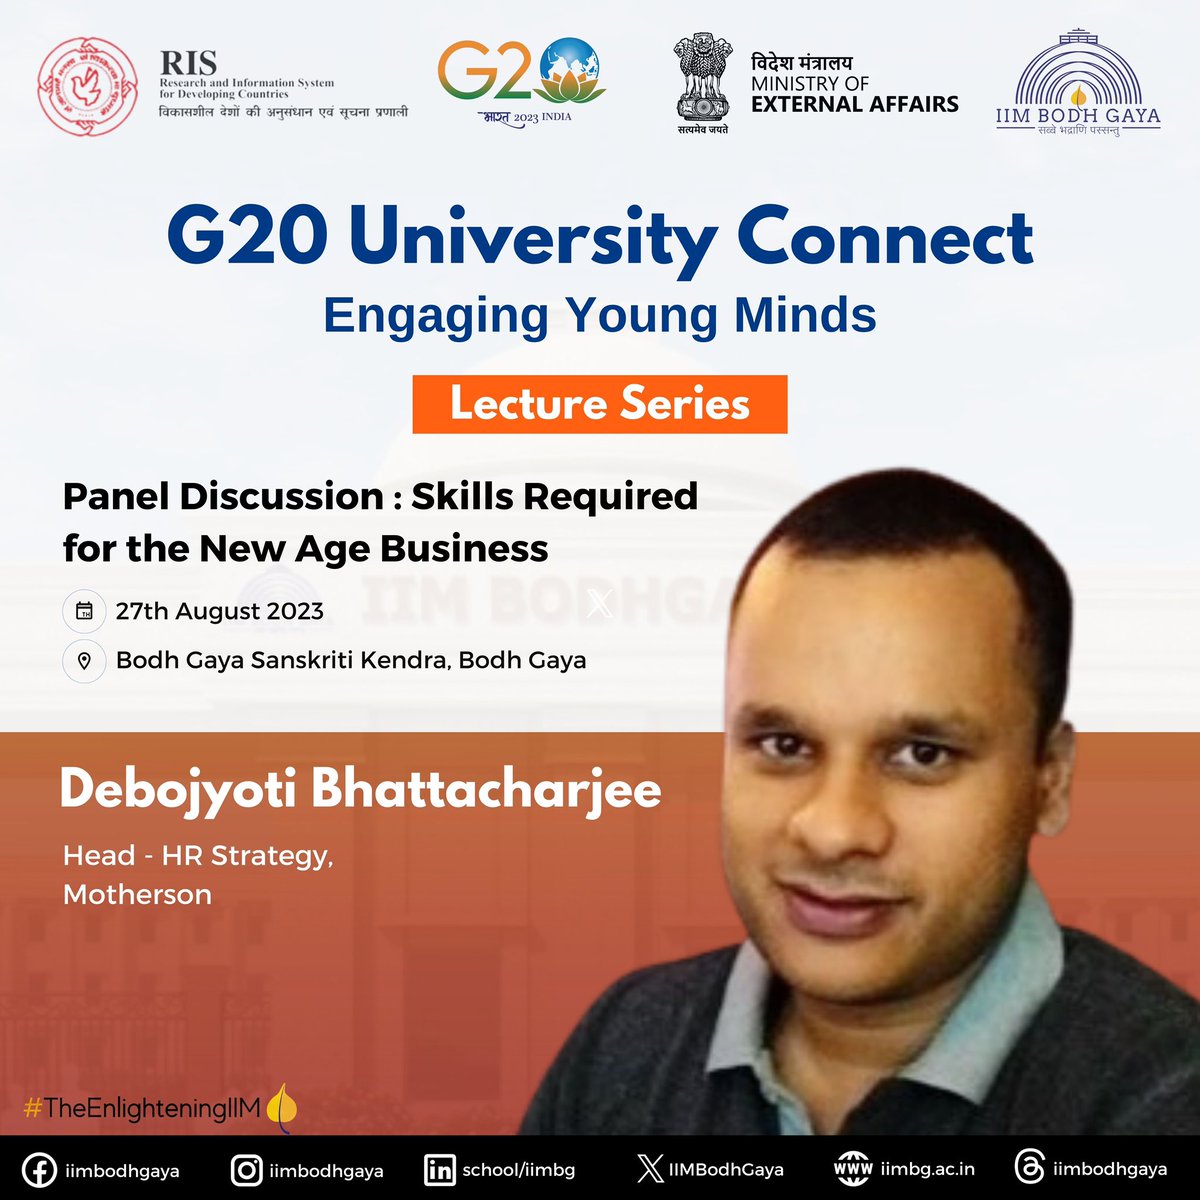 Mr. Debojyoti Bhattacharjee, Head of HR Strategy at Motherson, will be gracing us with his kind presence in the G20 Presidency Lecture Series.

#G20 #Universityconnect